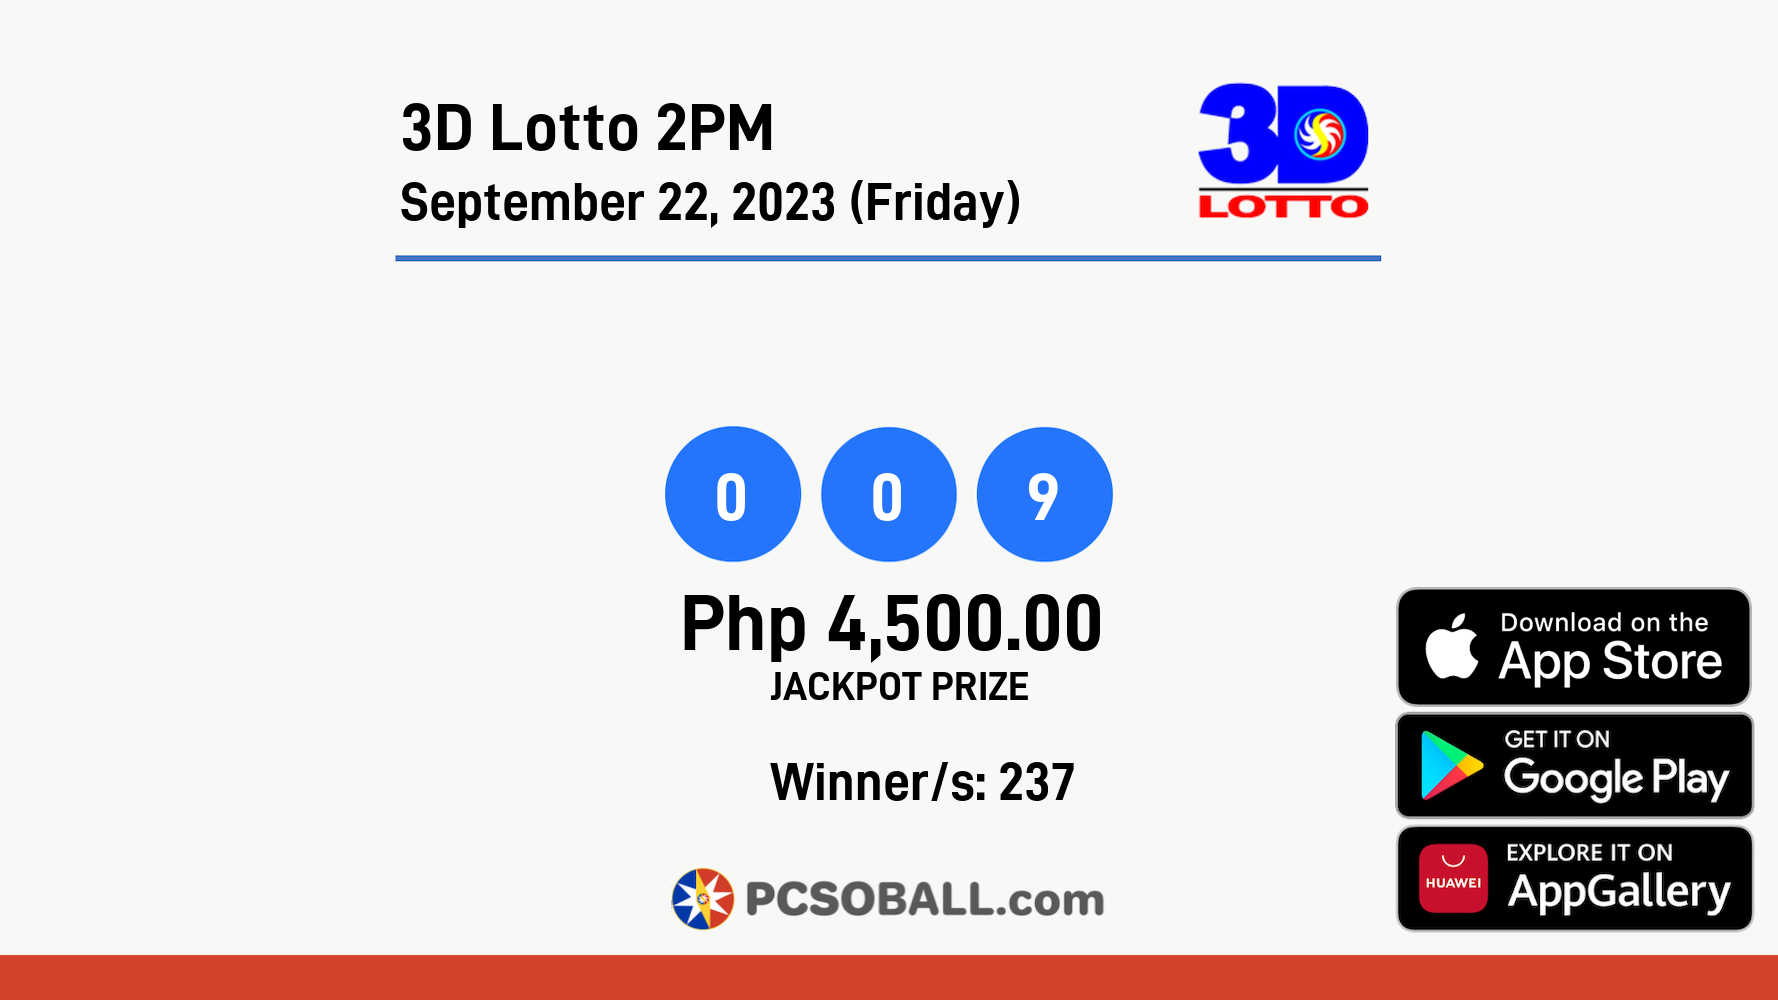 3D Lotto 2PM September 22, 2023 (Friday) Result